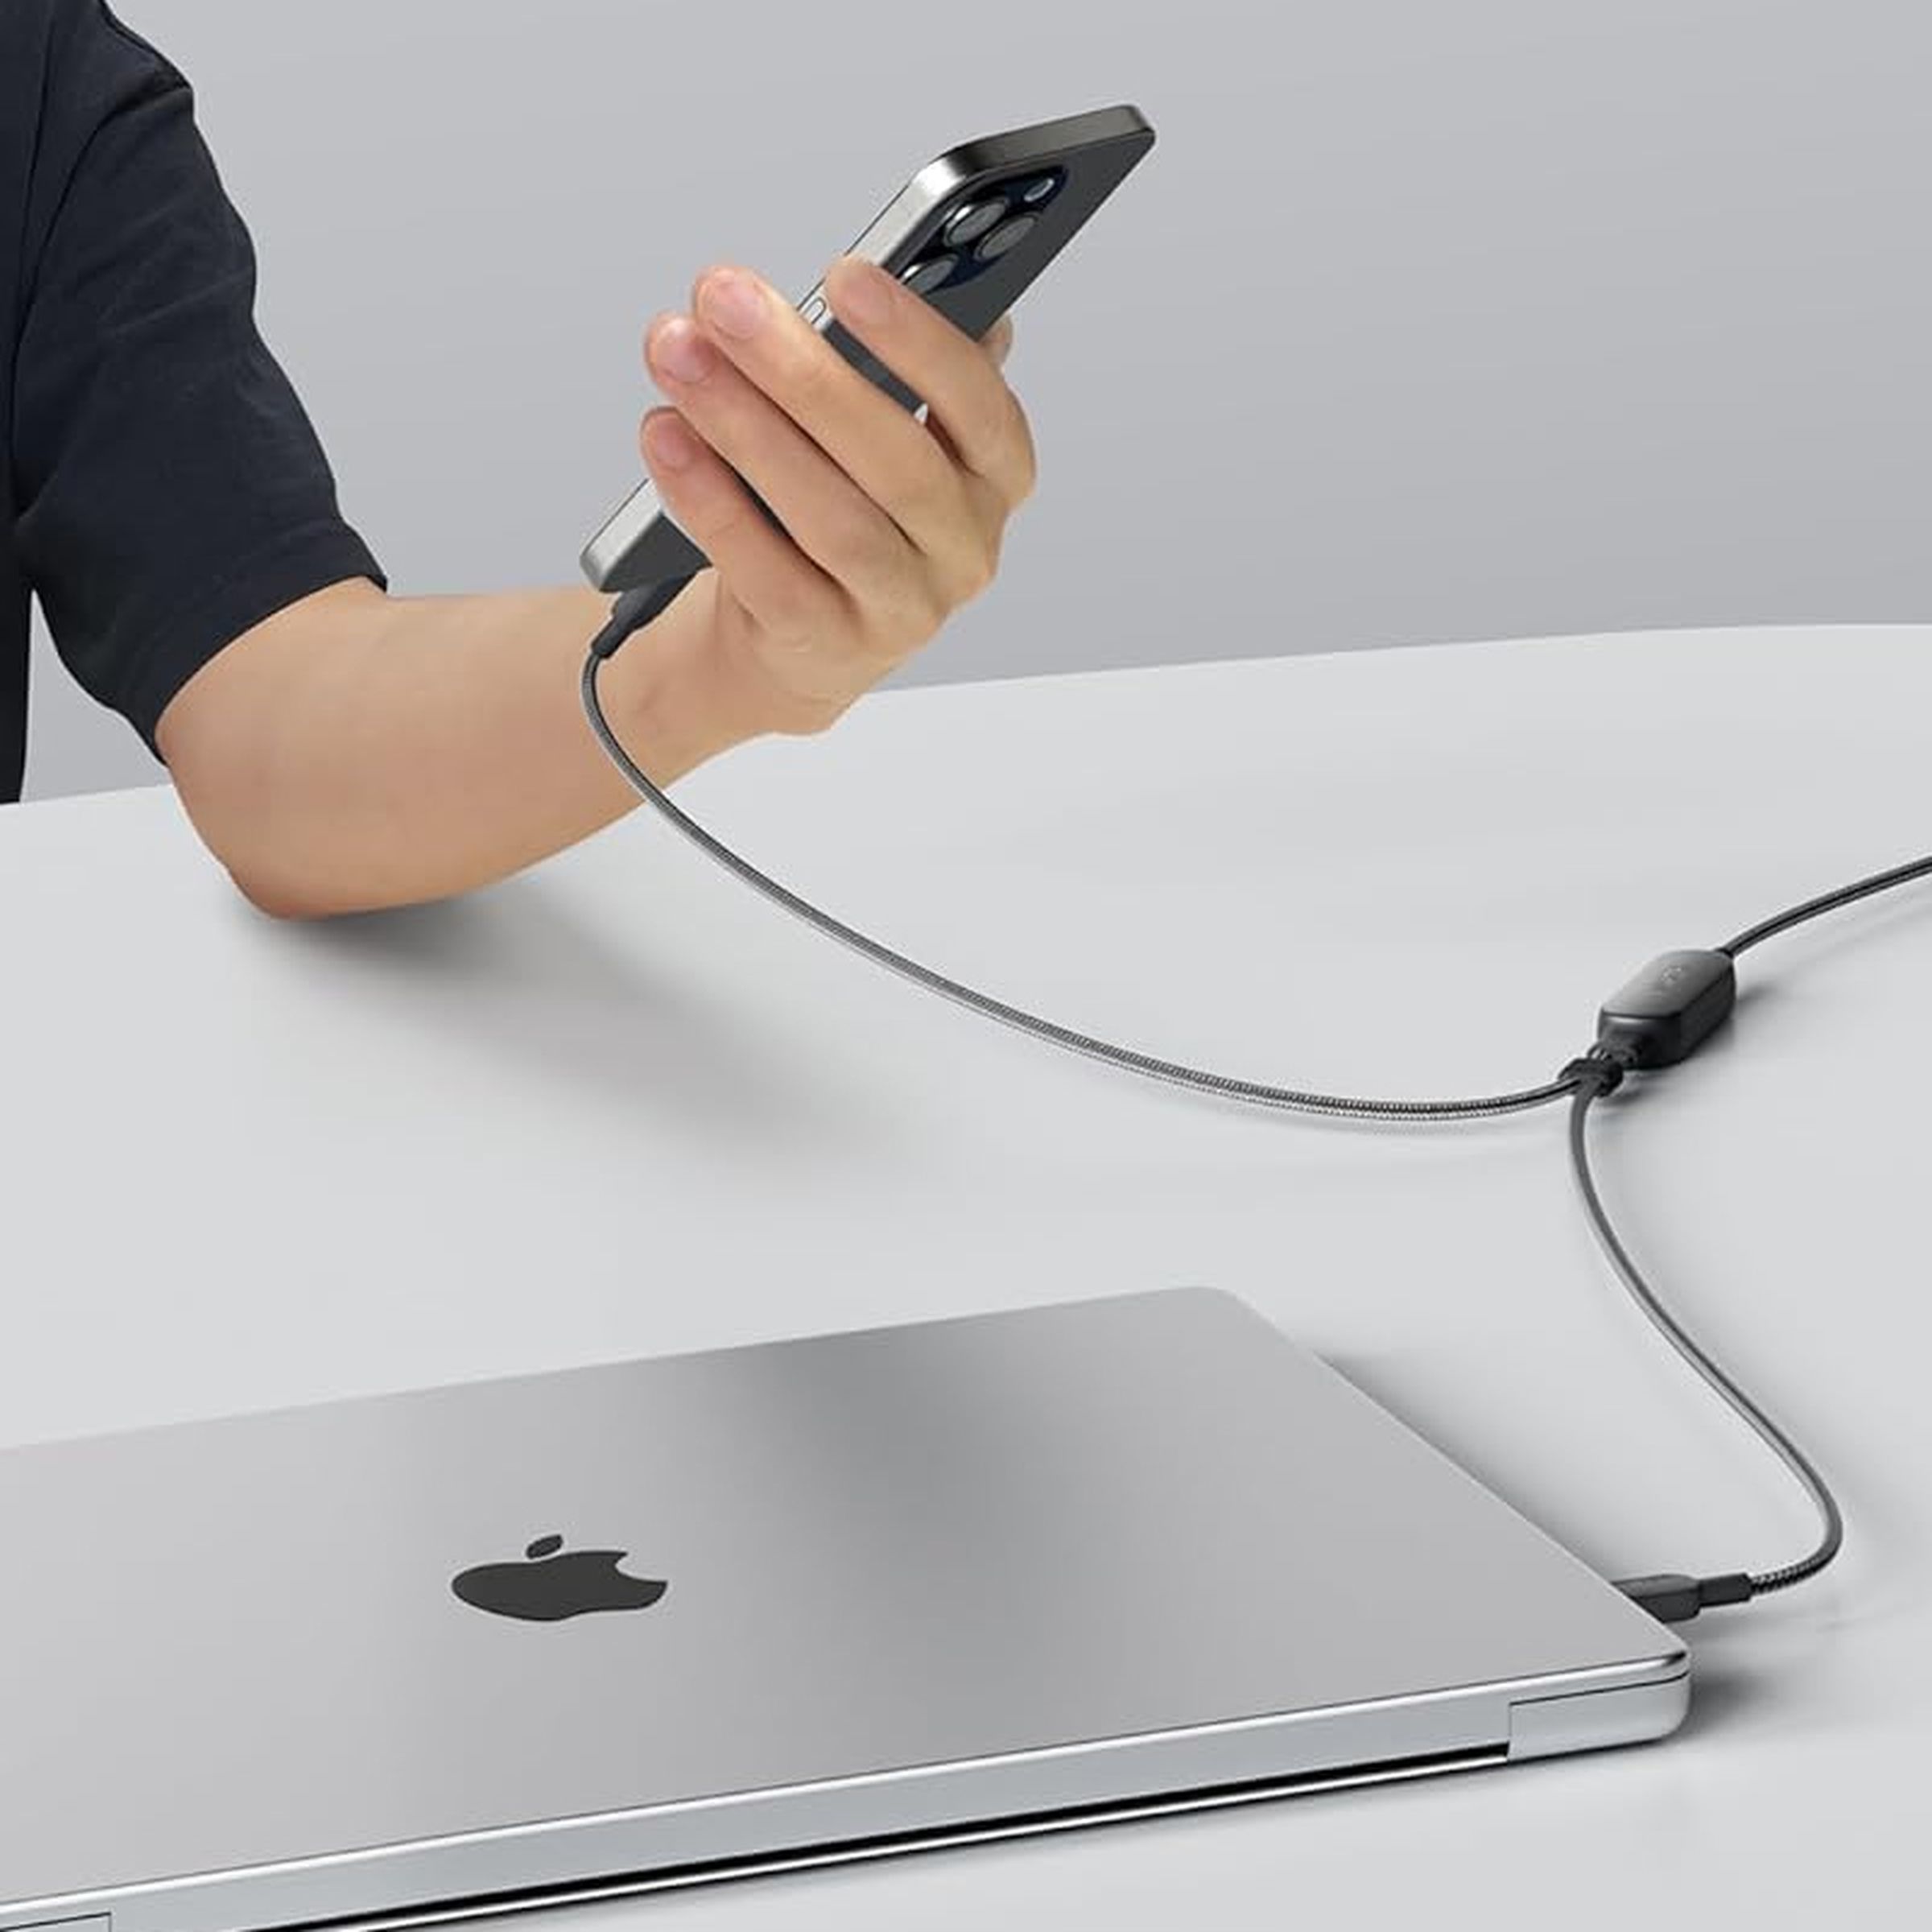 An Apple MacBook and iPhone being simultaneously charged using Anker’s new 2-in-1 USB-C cable.